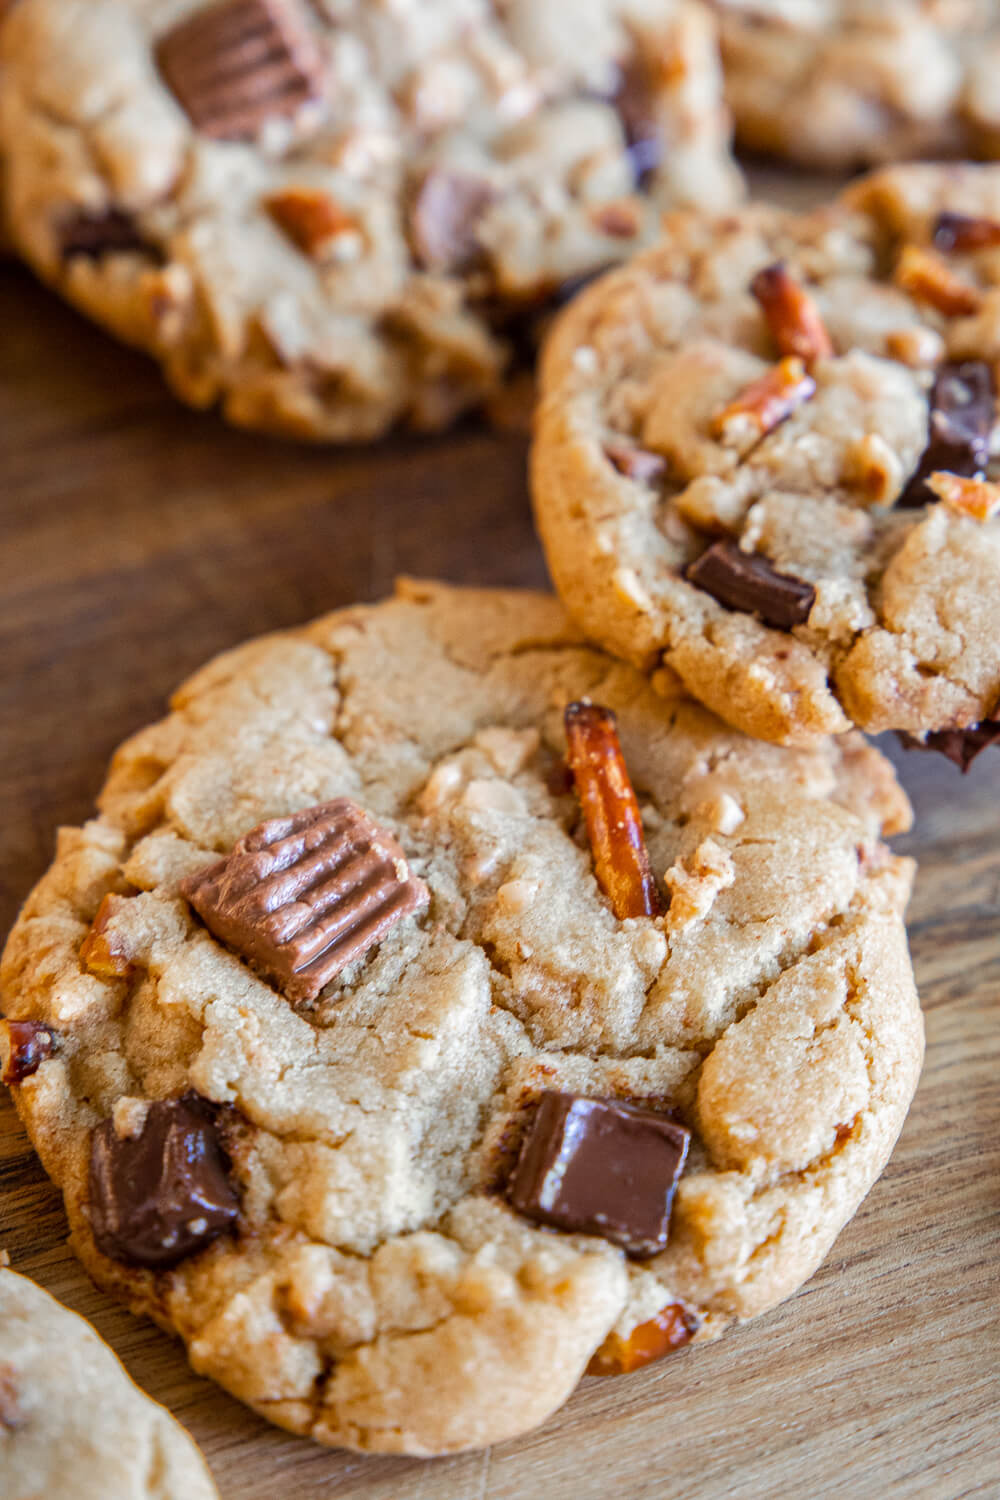 Brown Butter Cookies with Toffee, Chocolate Chips & More